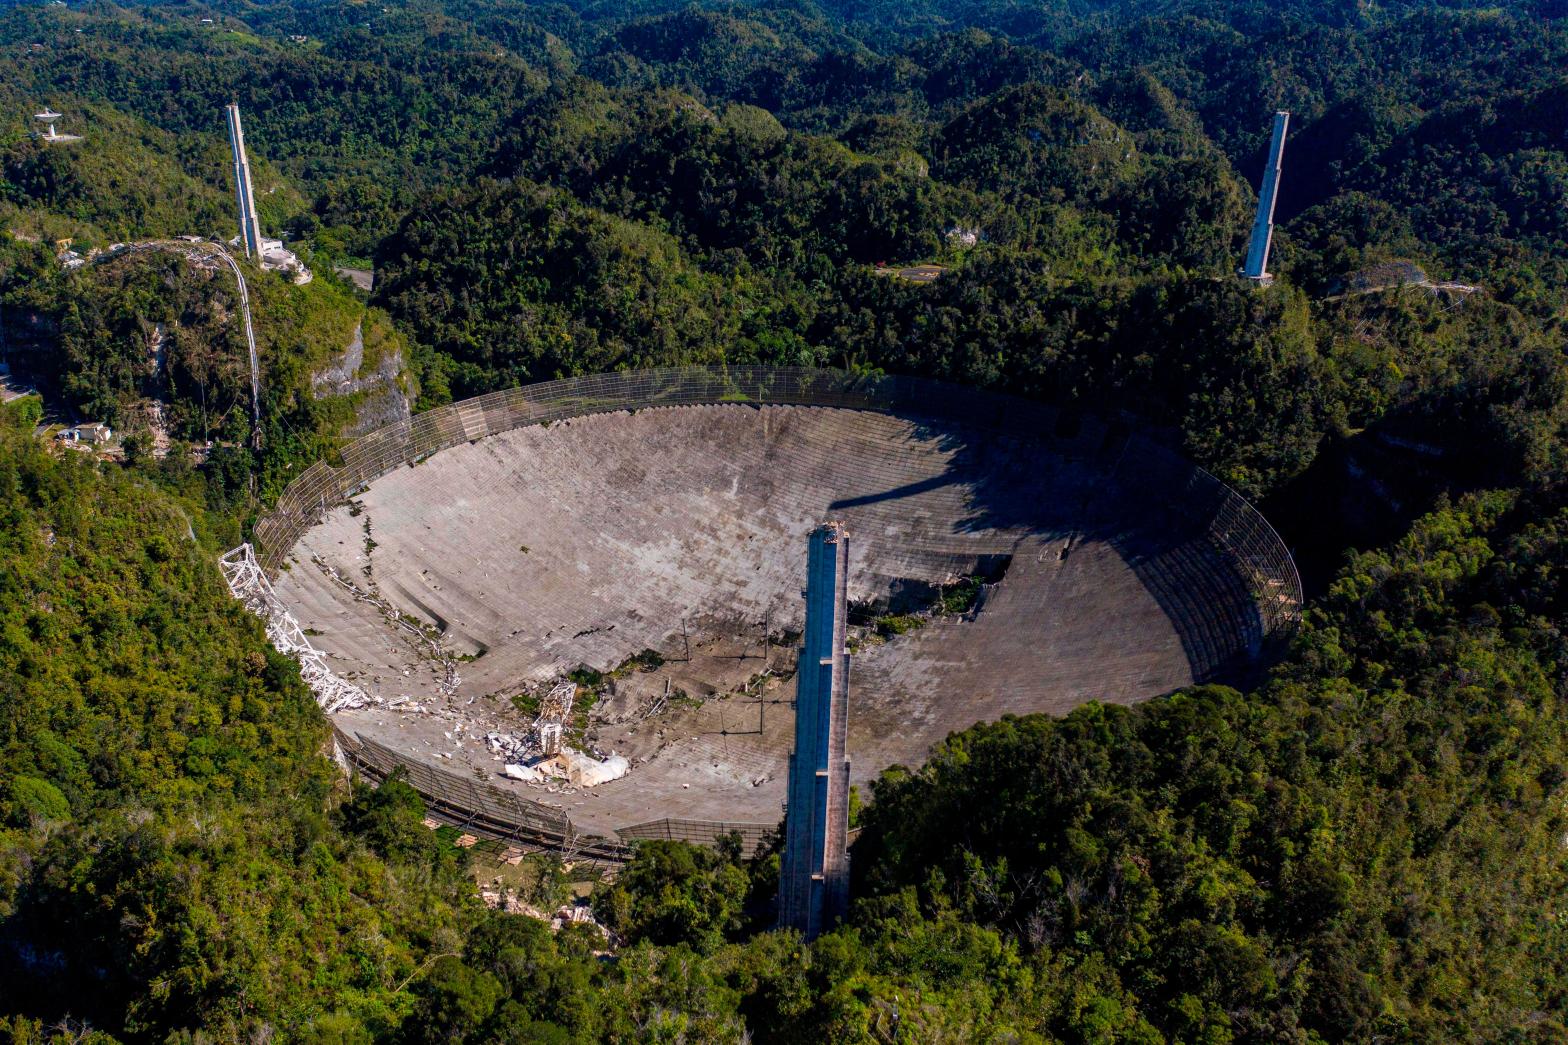 The destroyed Arecibo Observatory dish. (Photo: Ricardo ARDUENGO / AFP, Getty Images)